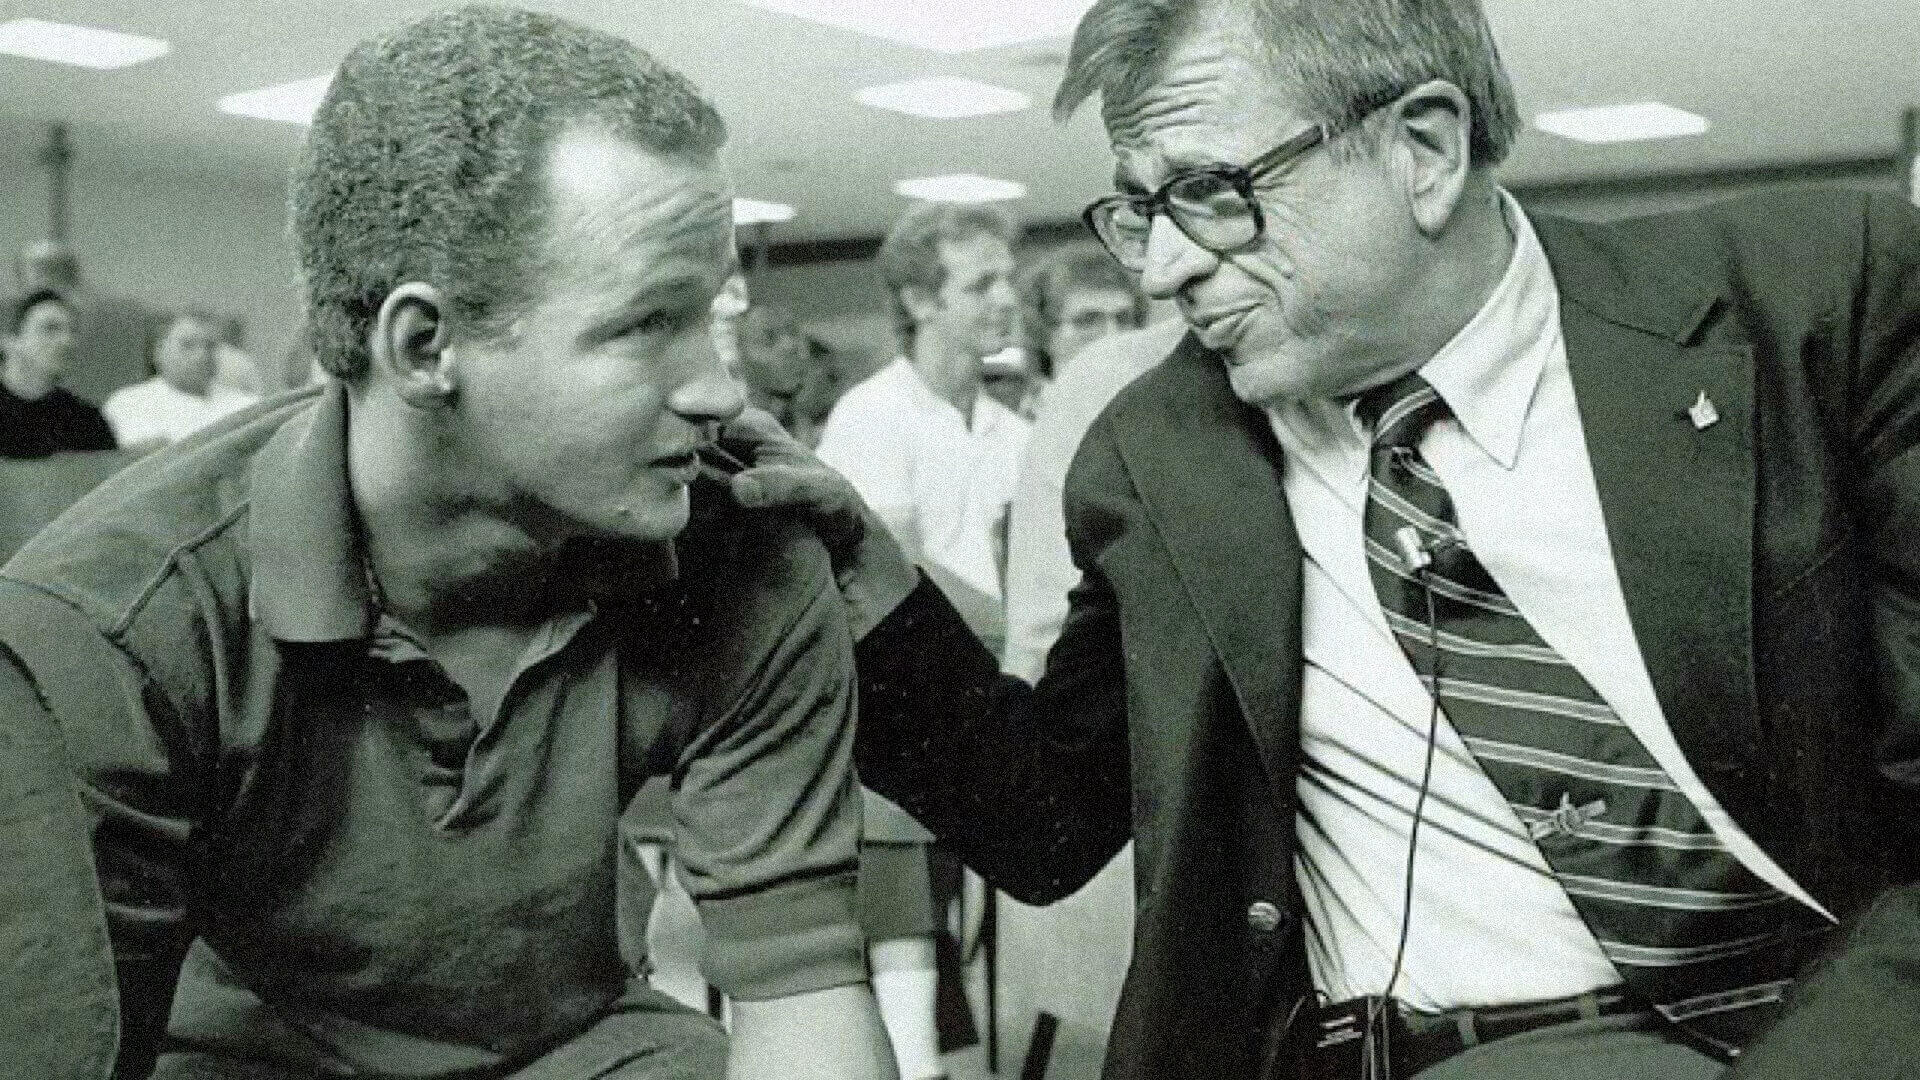 Chuck Colson established the Colson Center for Christian Worldview to help Christians understand how their faith connects to all parts of life